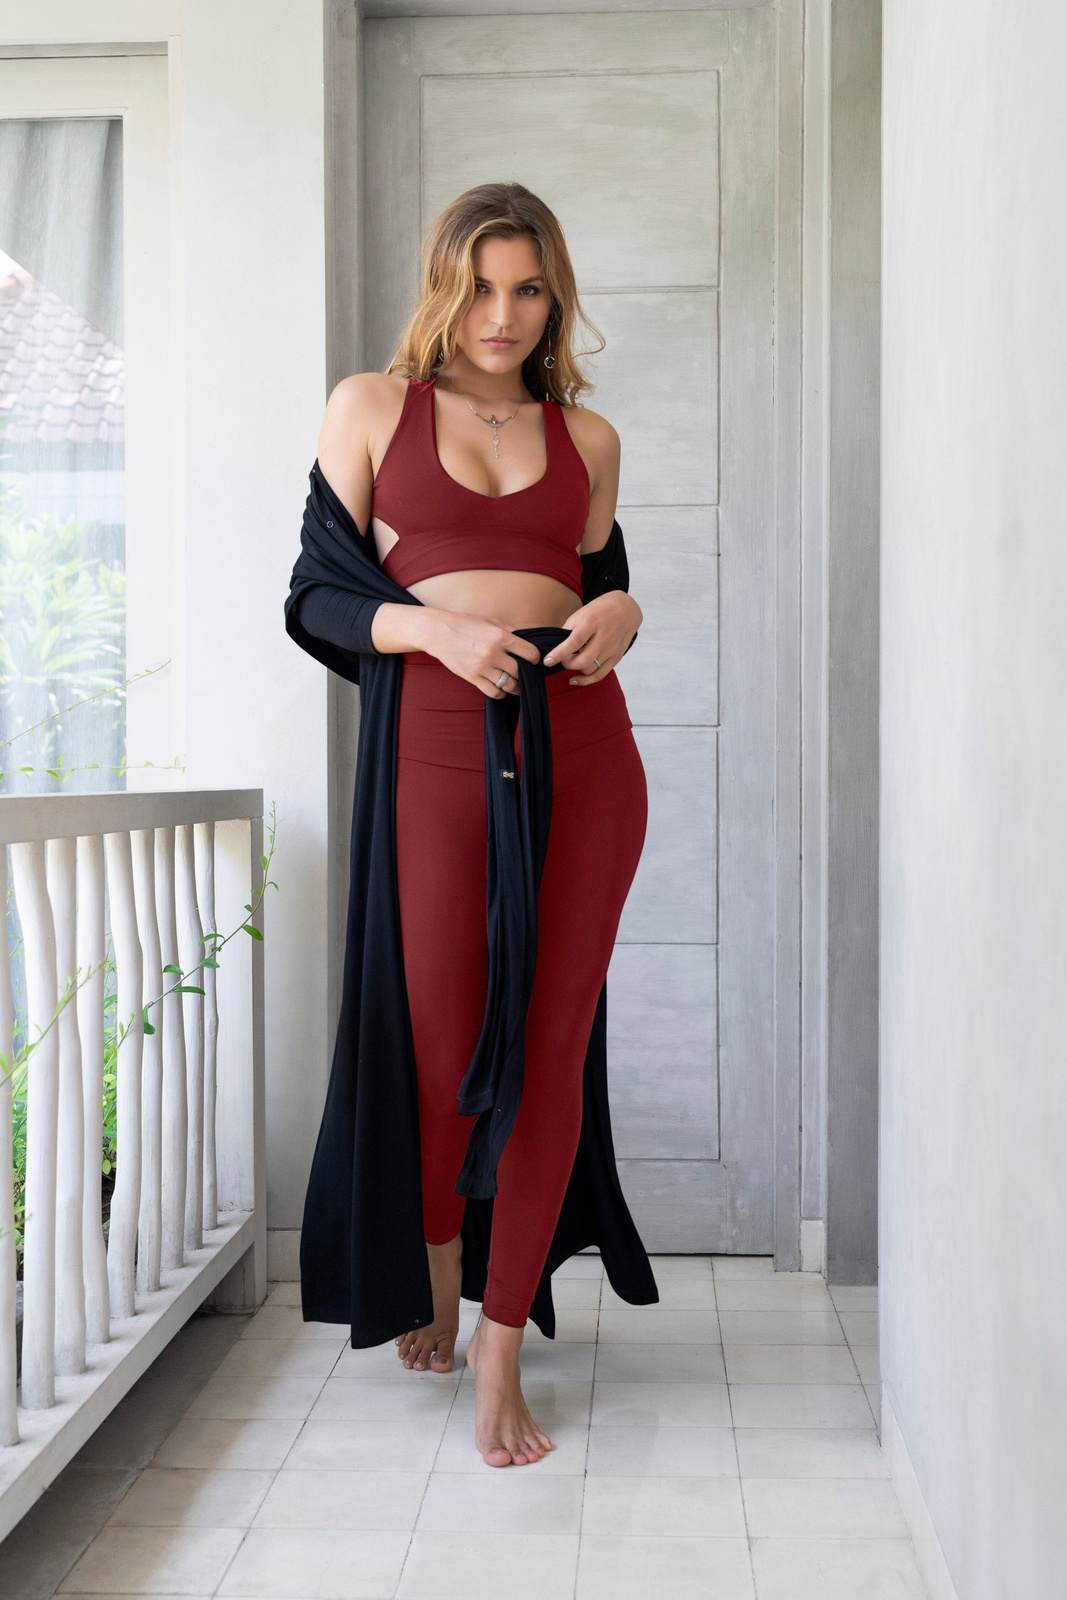 Vino Dark Red lounge leggings made with eco friendly recycled fabric from Ekoluxe sustainable loungewear brand.